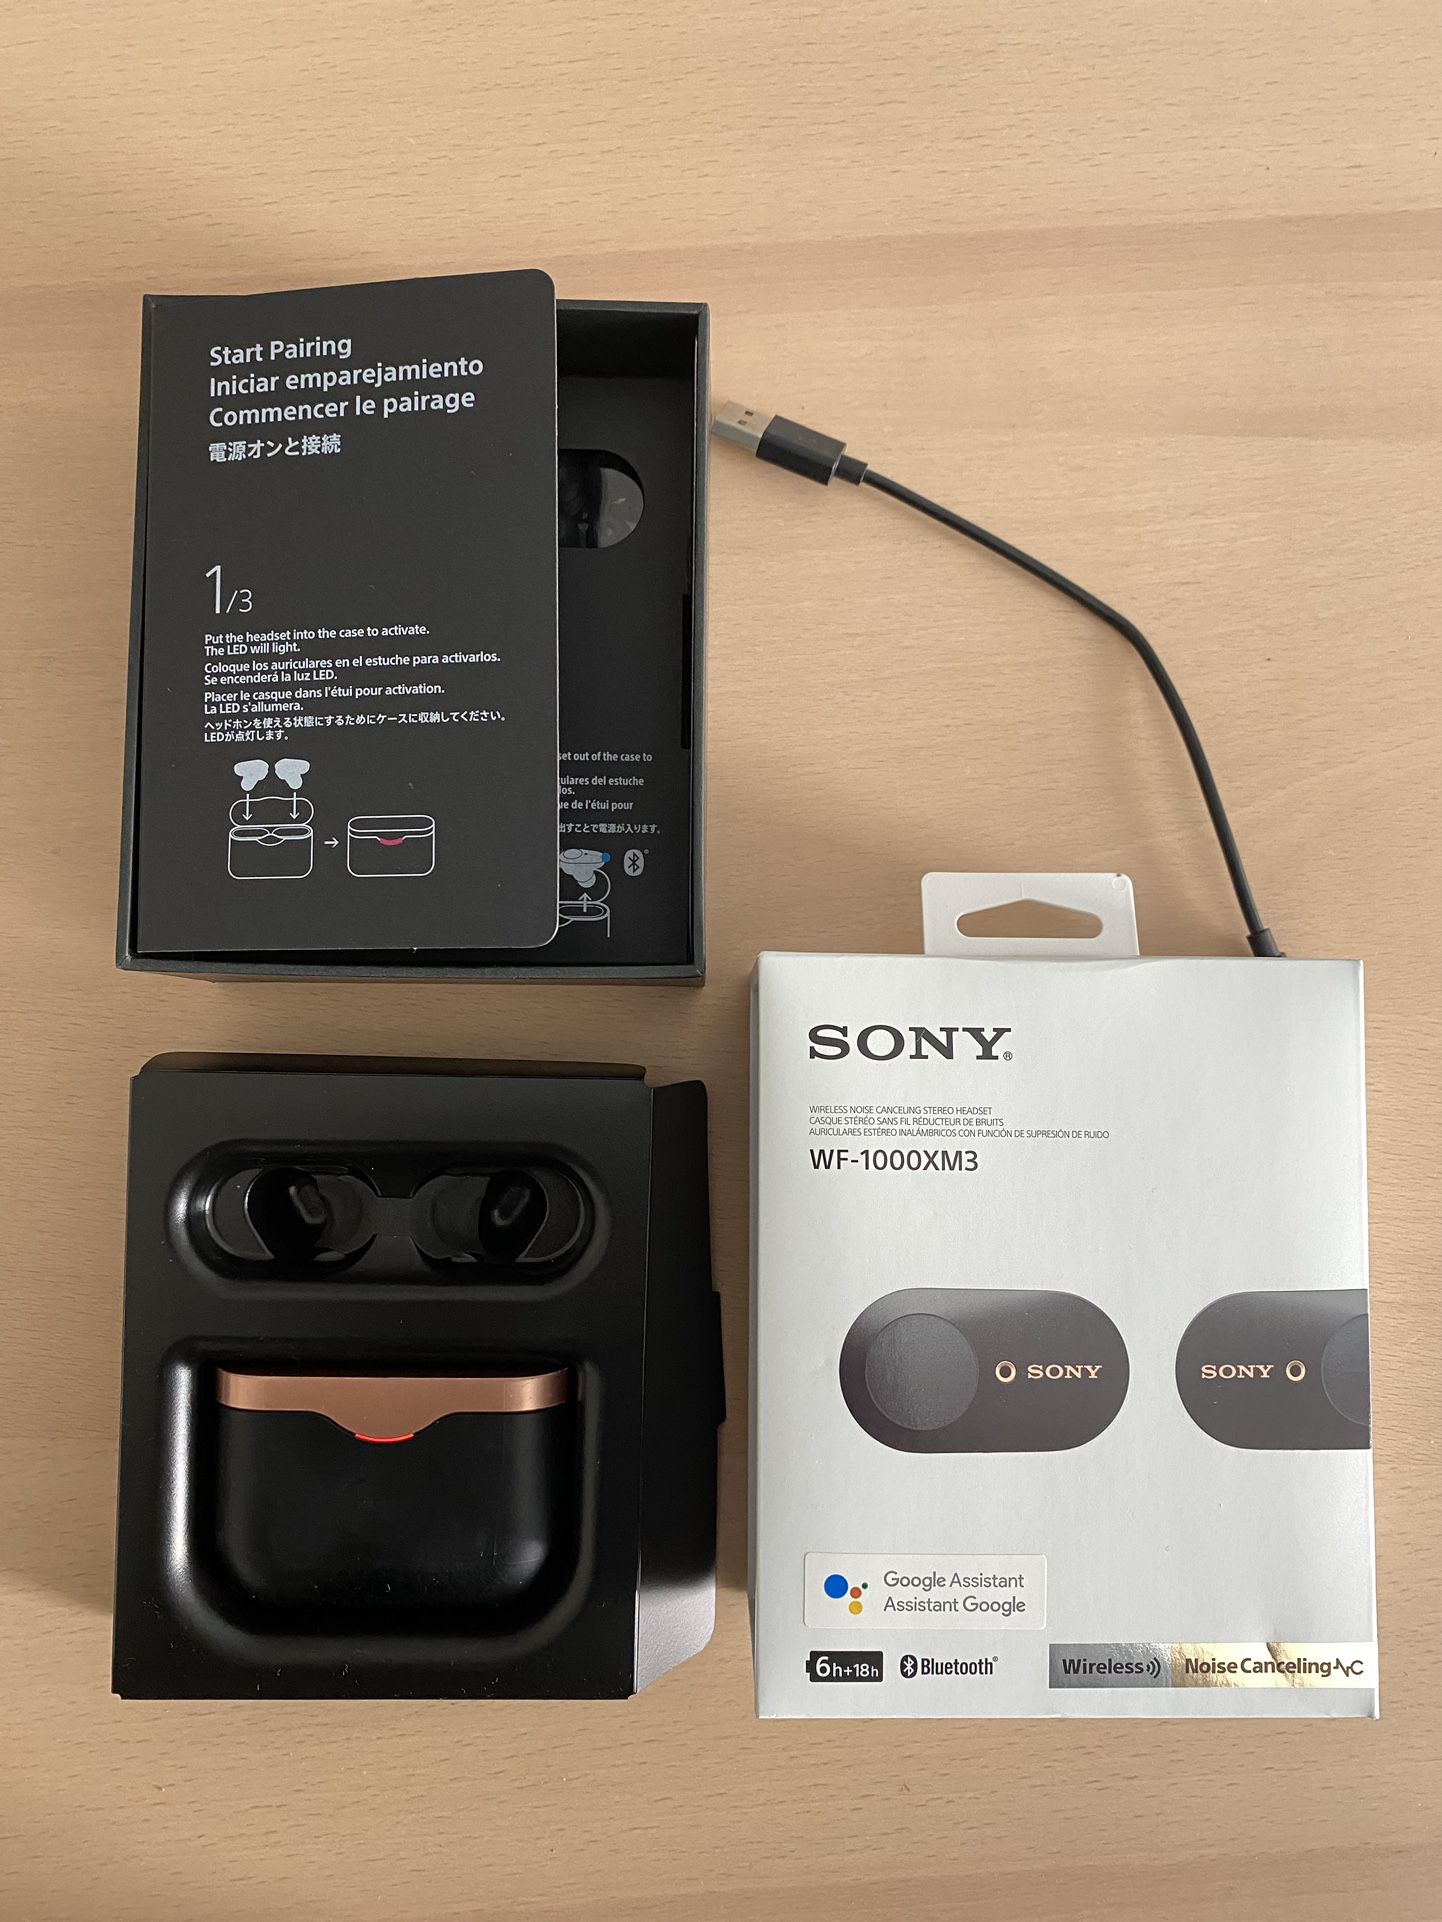 Sony WF-1000XM3 Wireless Noise Cancelling Stereo Headphones Earbuds - Black